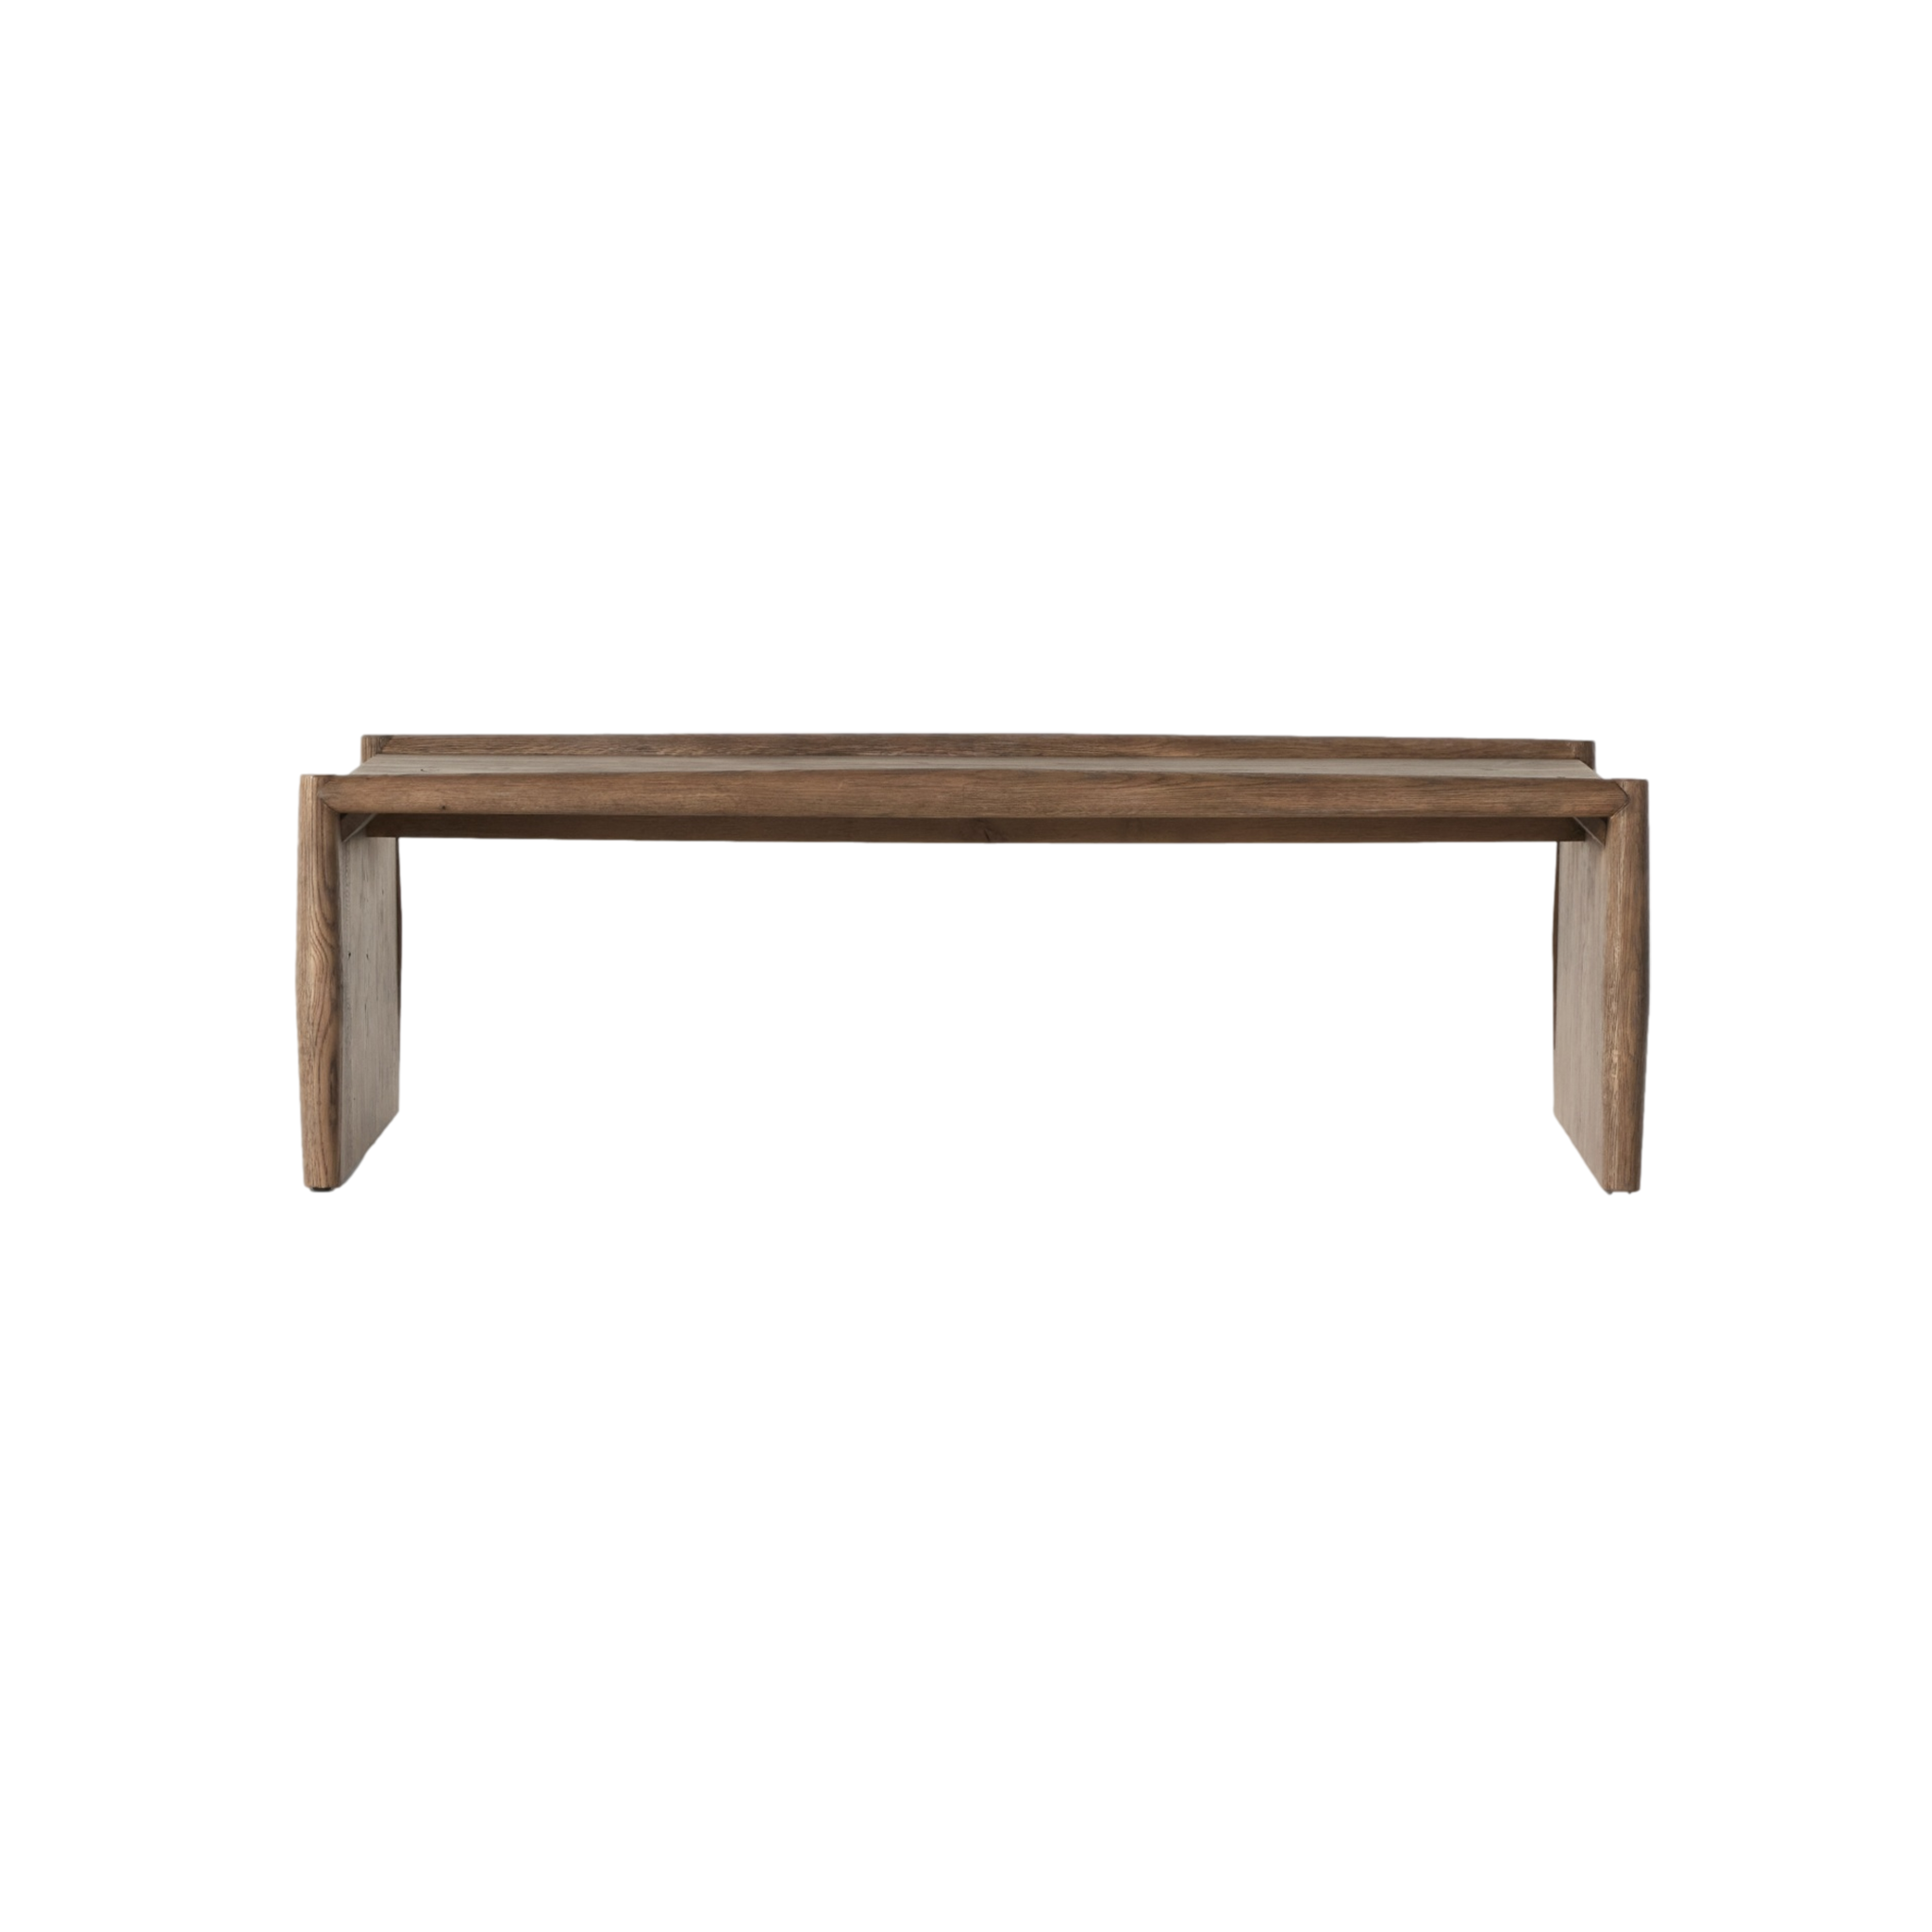 Glenview Coffee Table